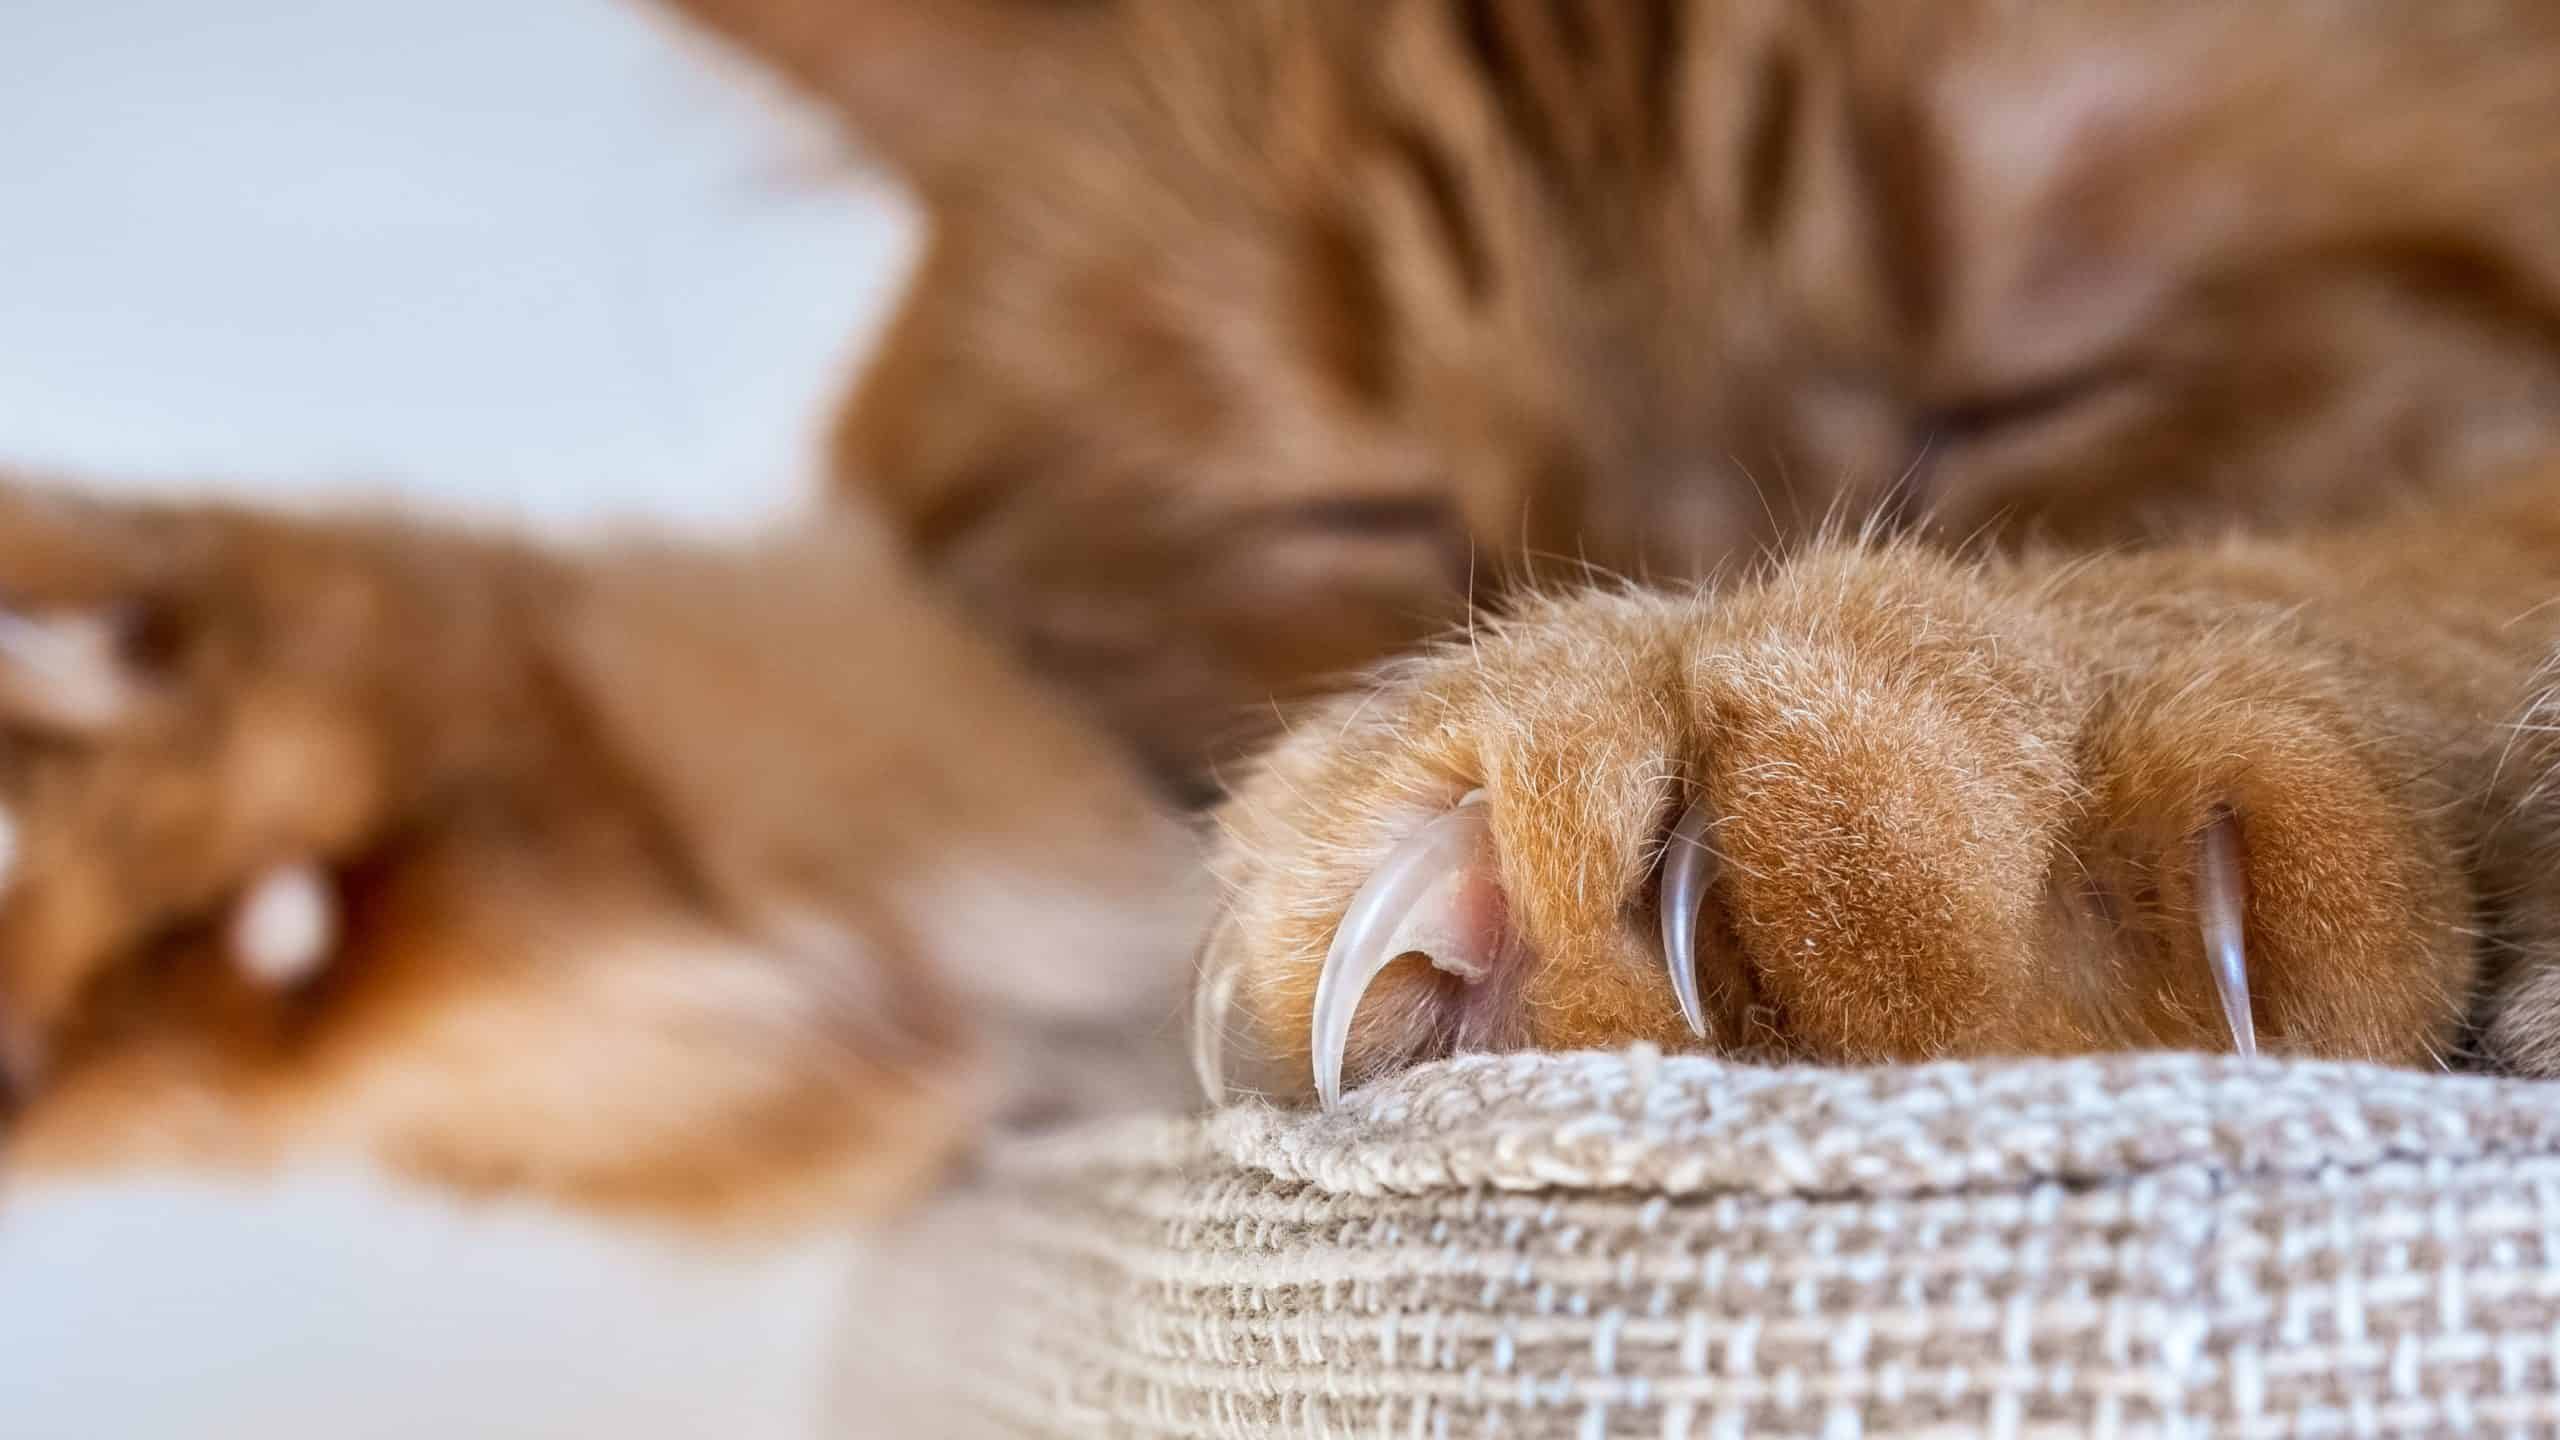 Close up of large claws visible on one of the front paws of a large orange cat